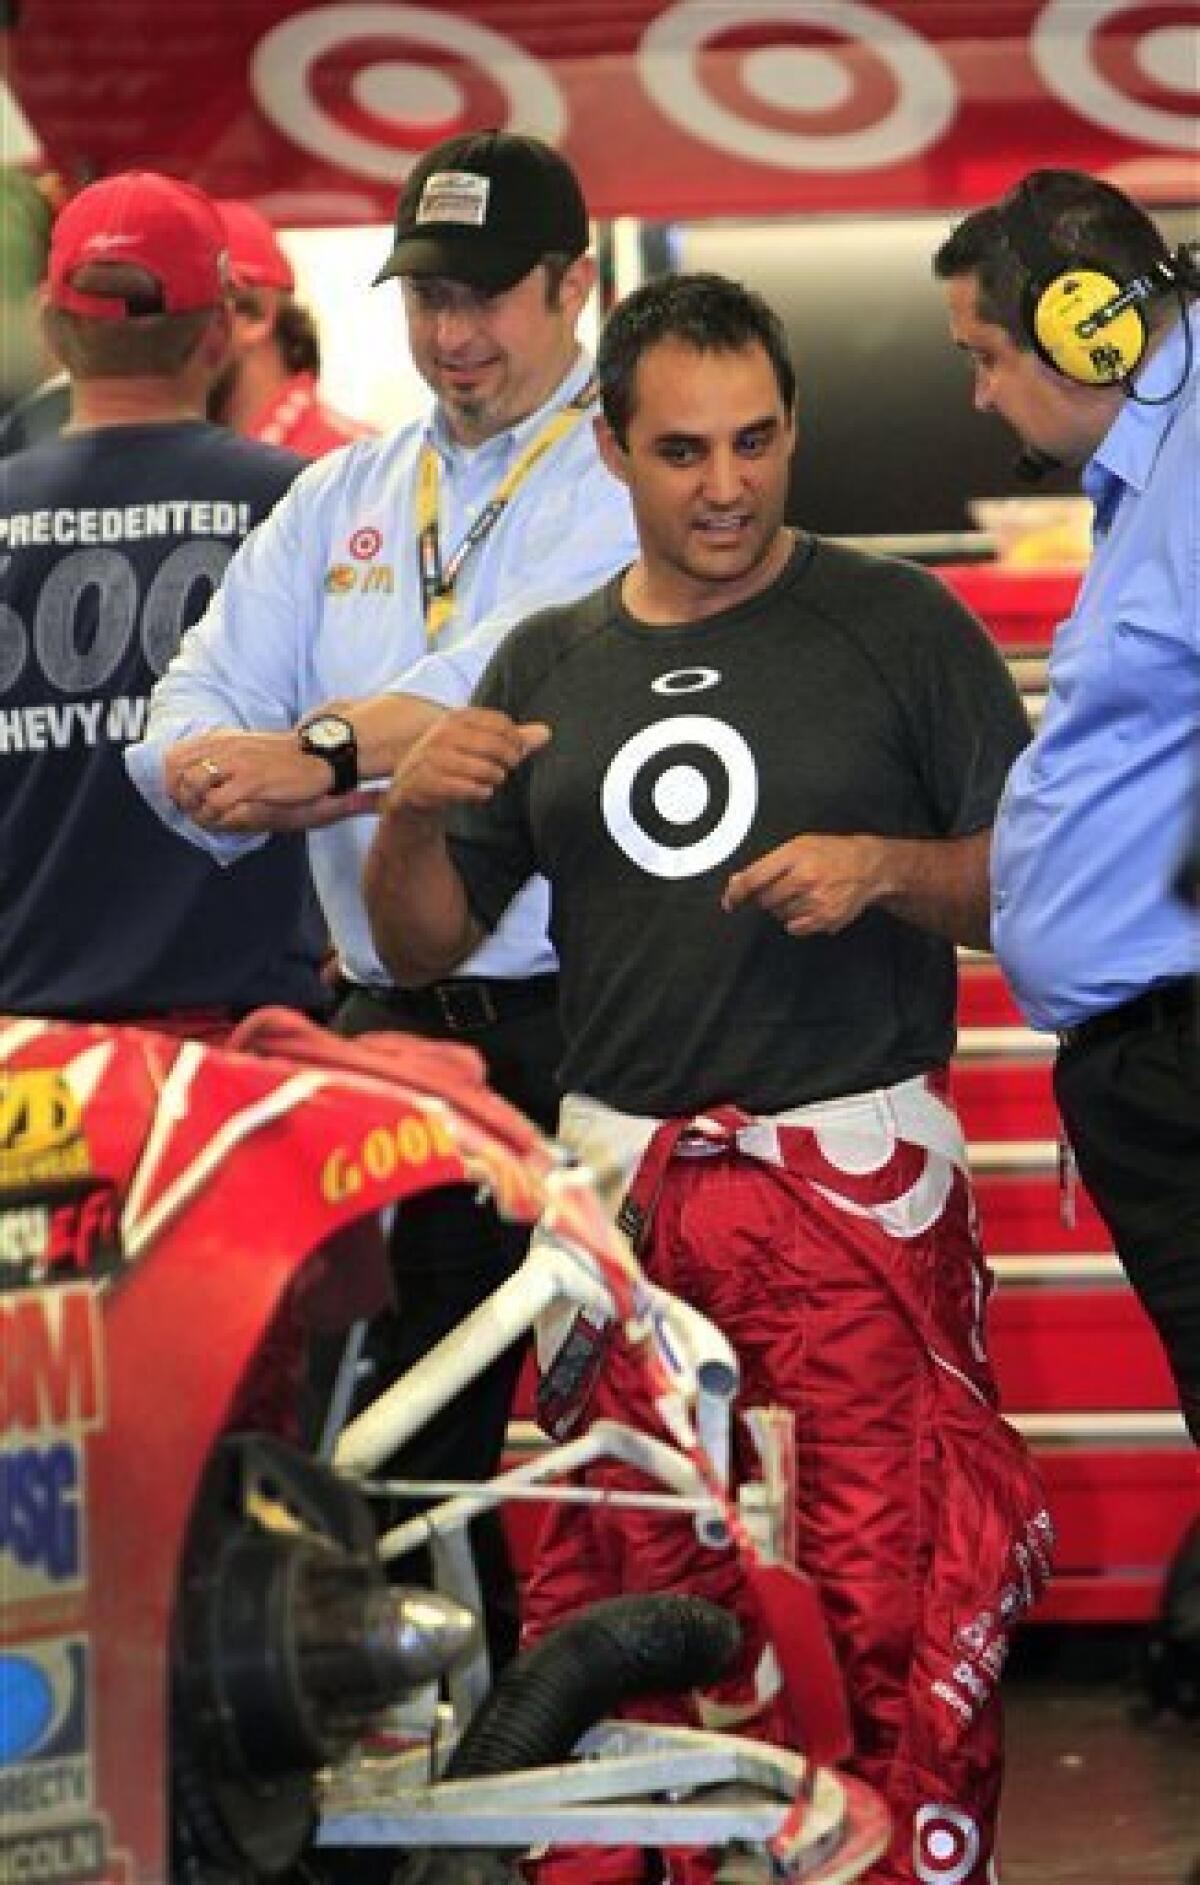 Juan Pablo Montoya, center, of Colombia, talks to team members in his garage after he was involved in a crash in the NASCAR Daytona 500 auto race at Daytona International Speedway in Daytona Beach, Fla., Monday, Feb. 27, 2012. (AP Photo/John Raoux)